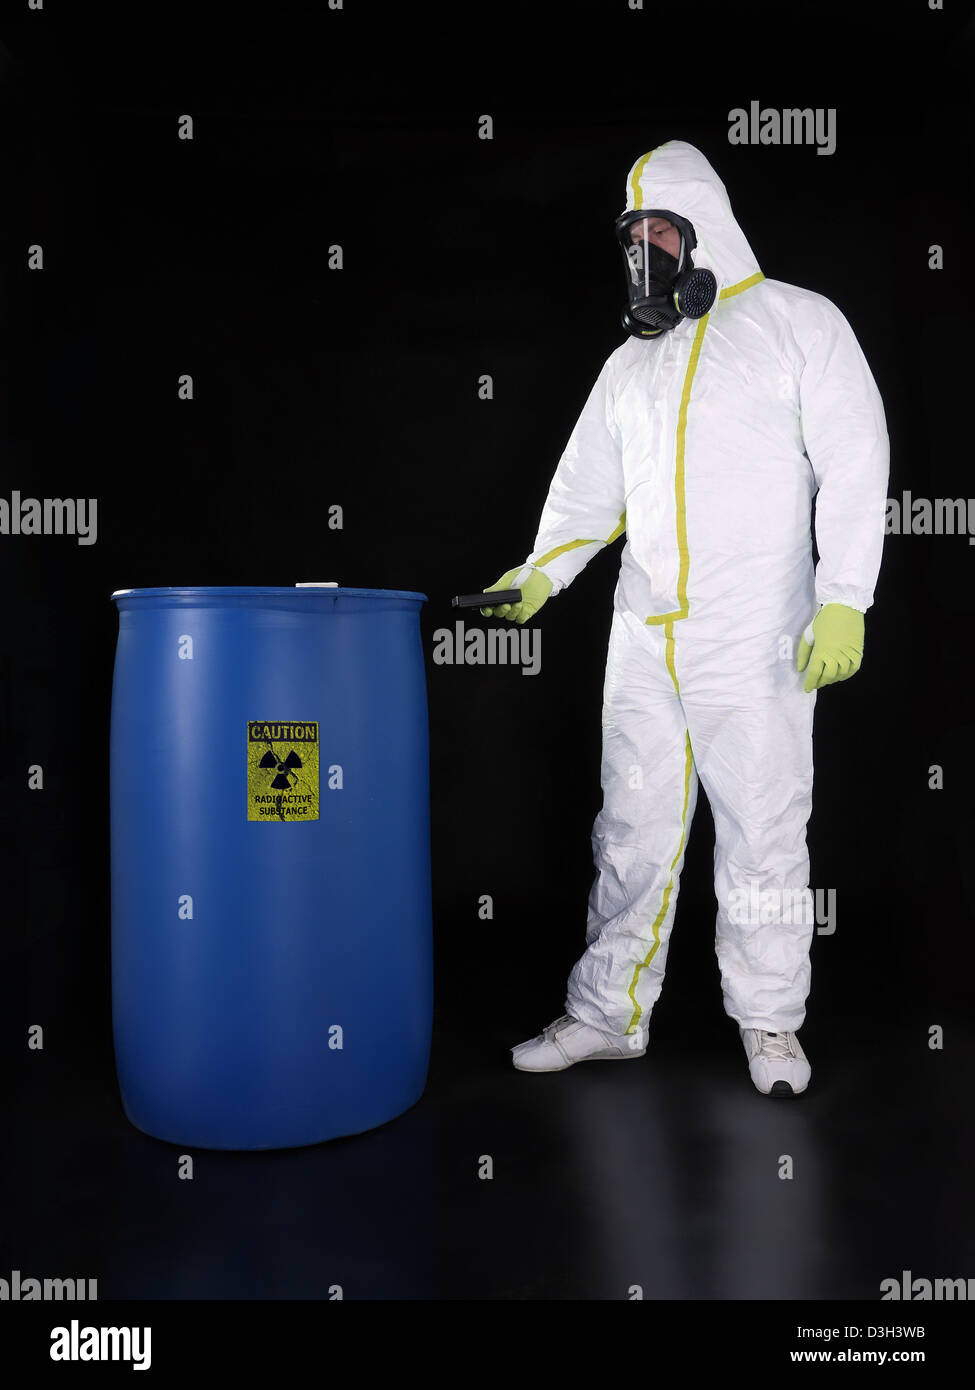 Man wearing protective suit checking radioactivity level of radioactive substance stored in blue container Stock Photo